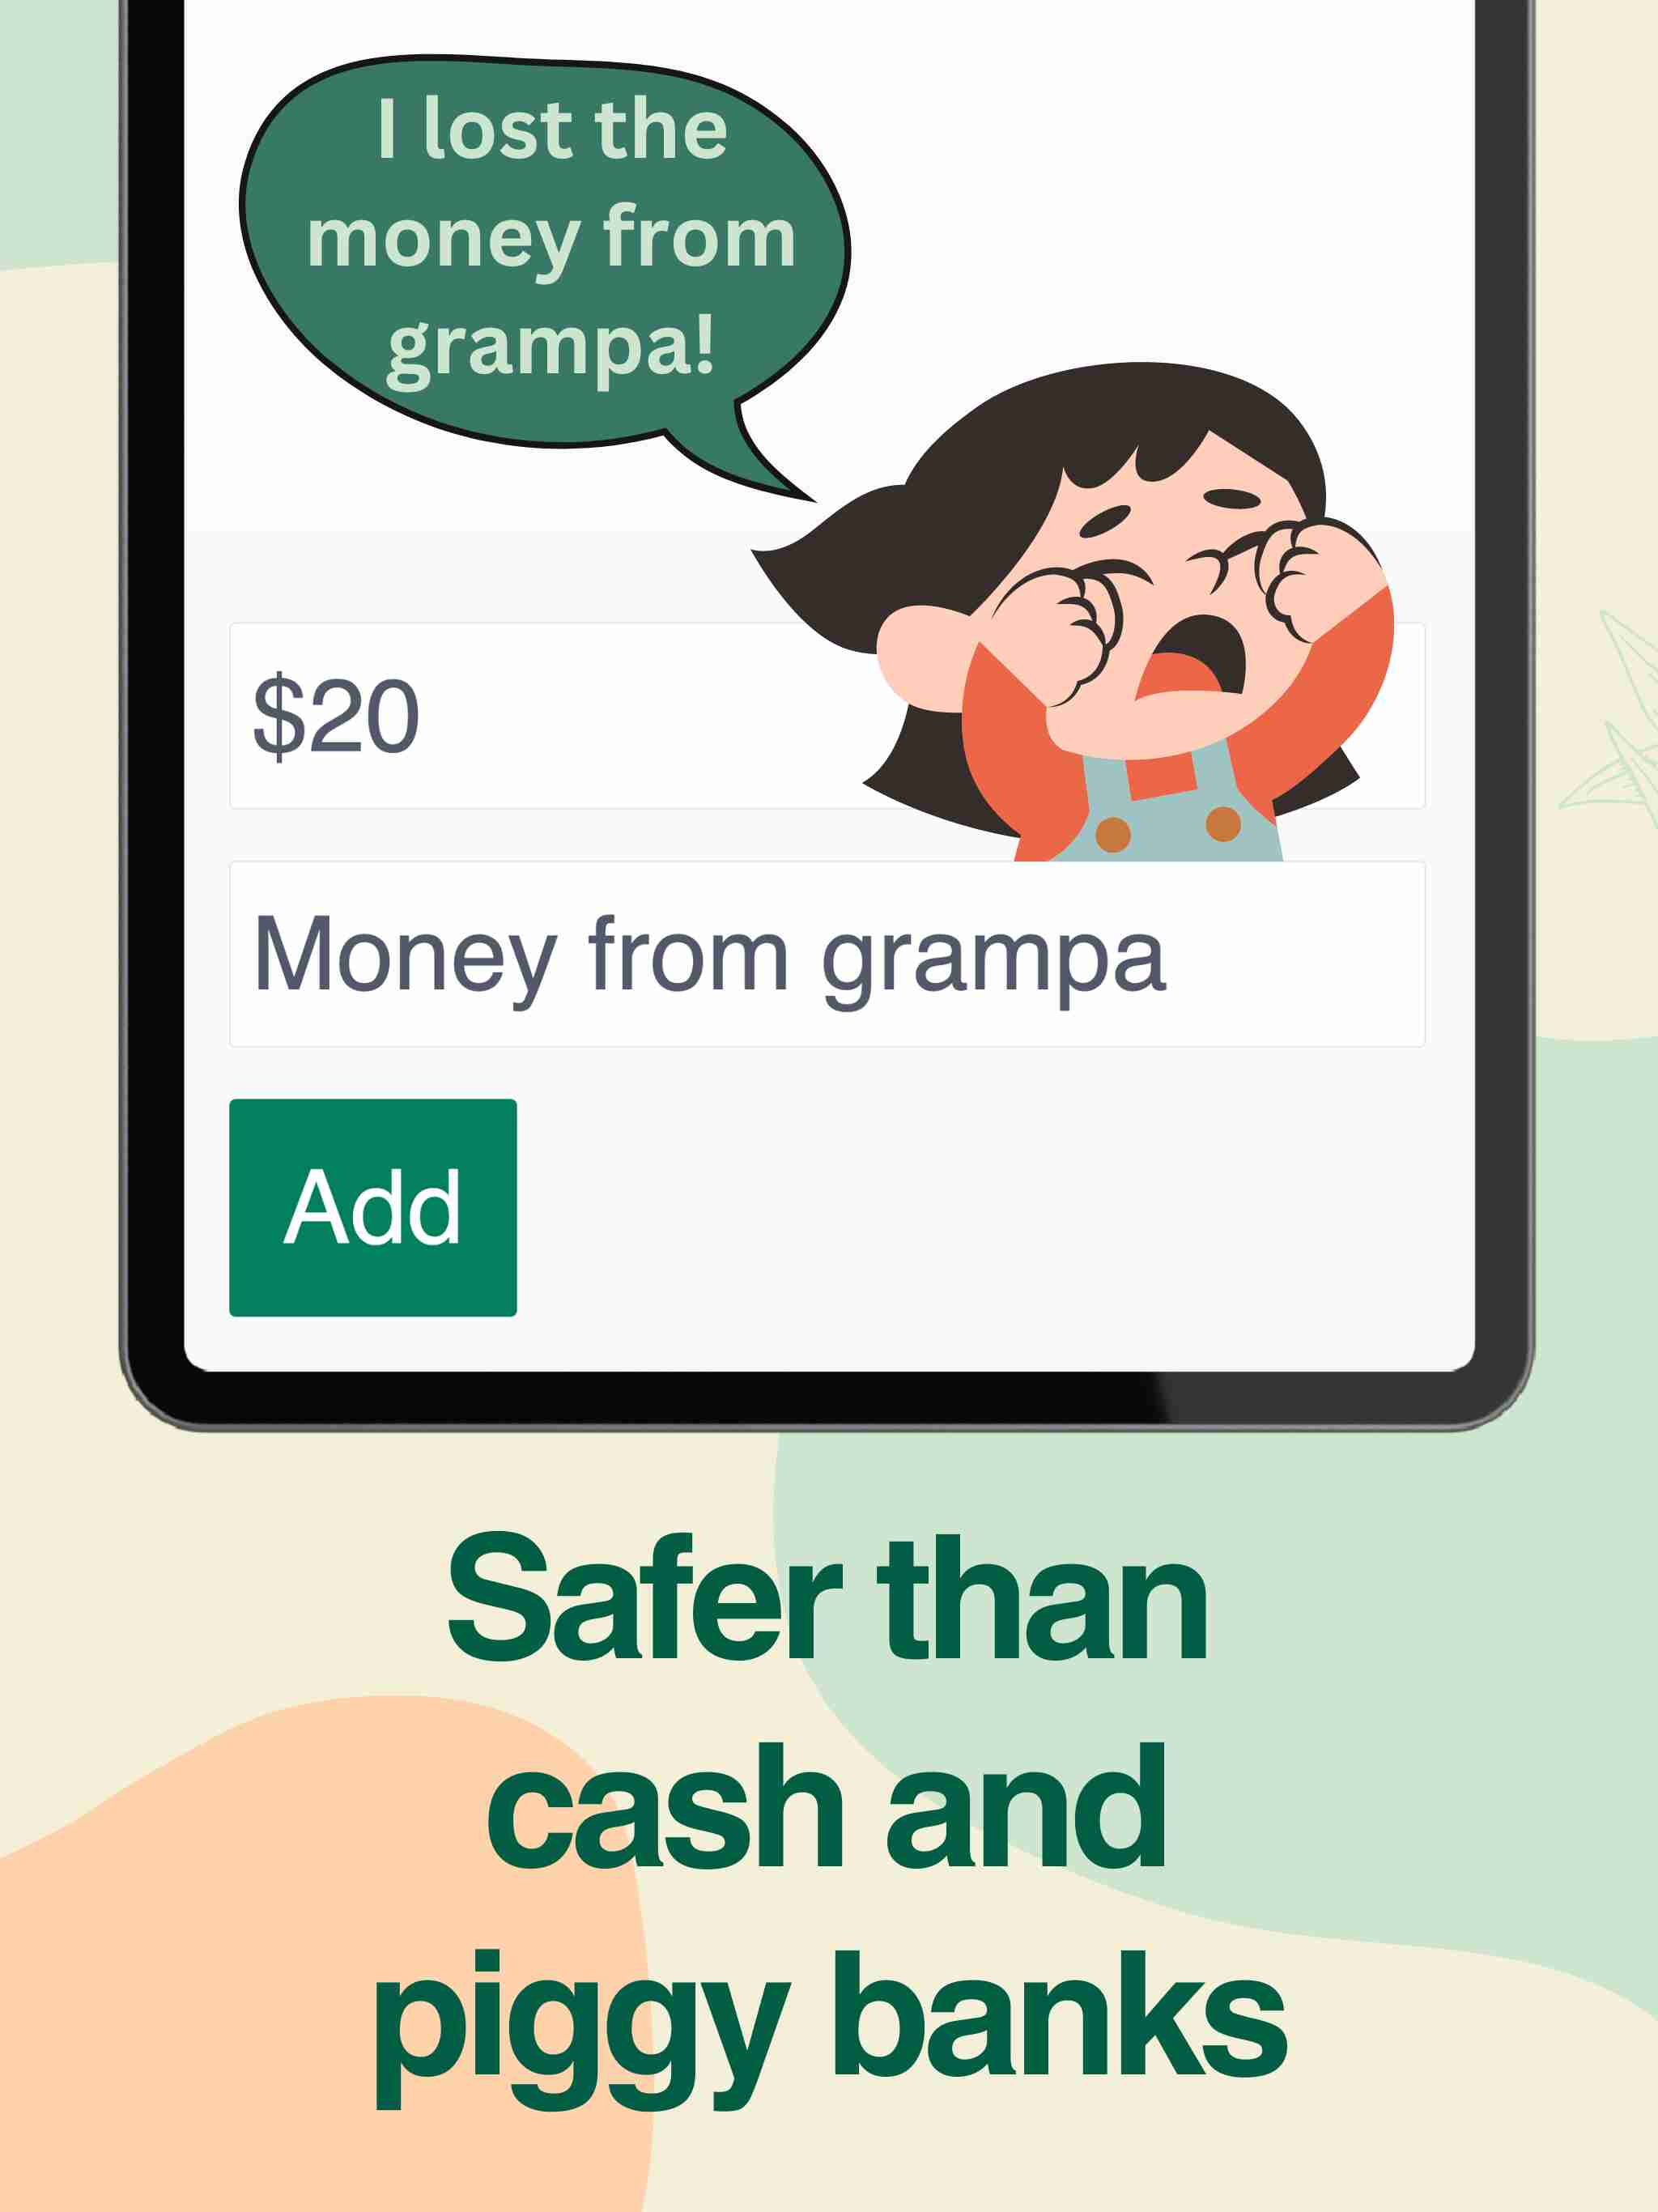 Safer than cash and piggy banks; I lost the money from grampa!